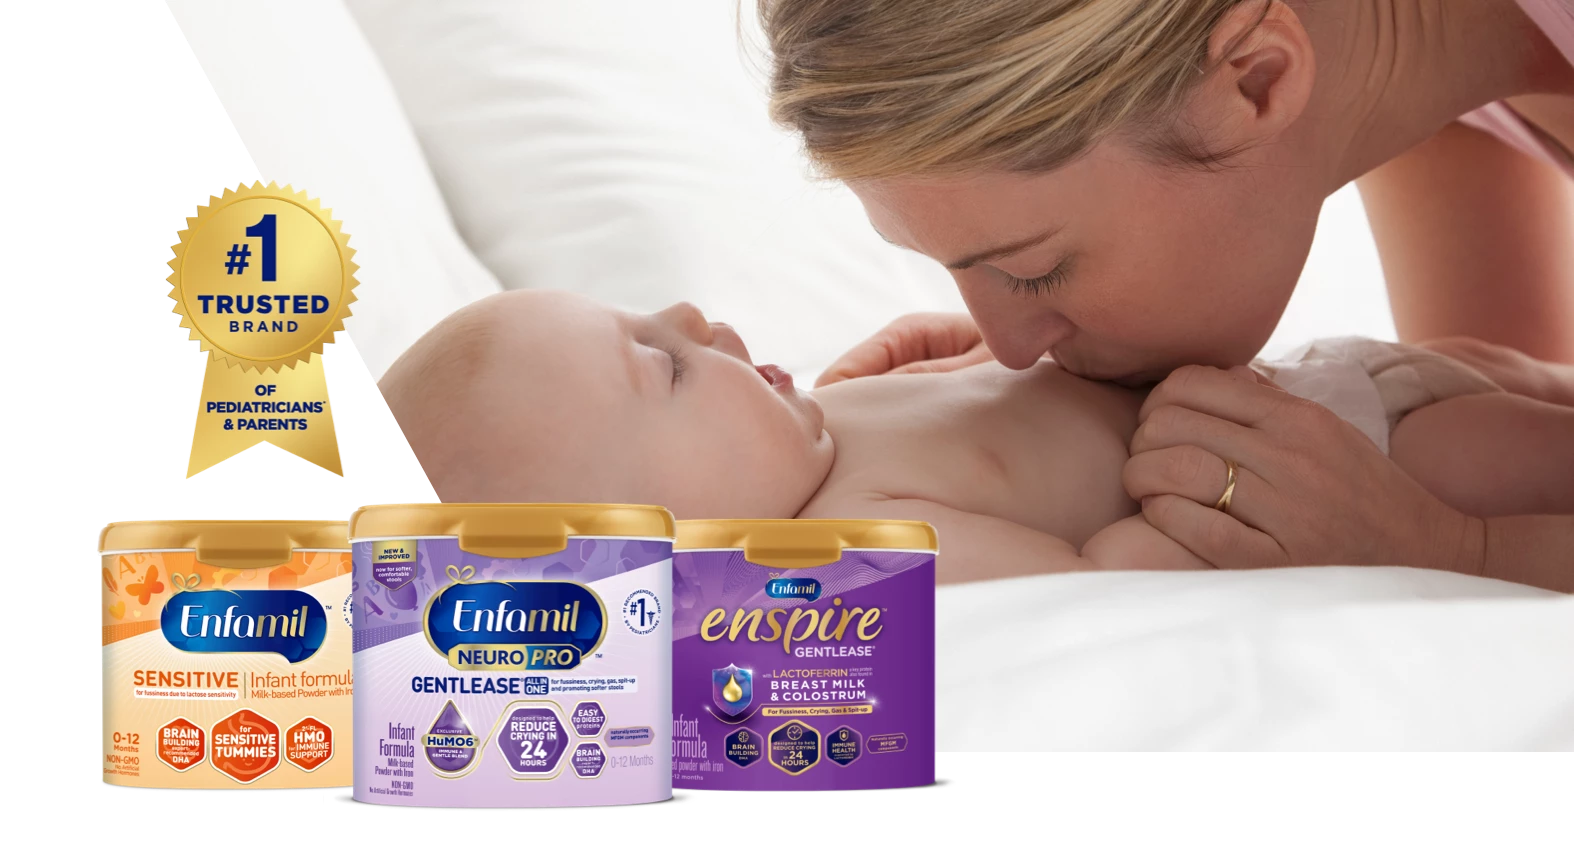 Formula for Tummy Troubles Enfamil #1 Trusted Brand of Pediatriacians and Parents, mom kissing baby belly